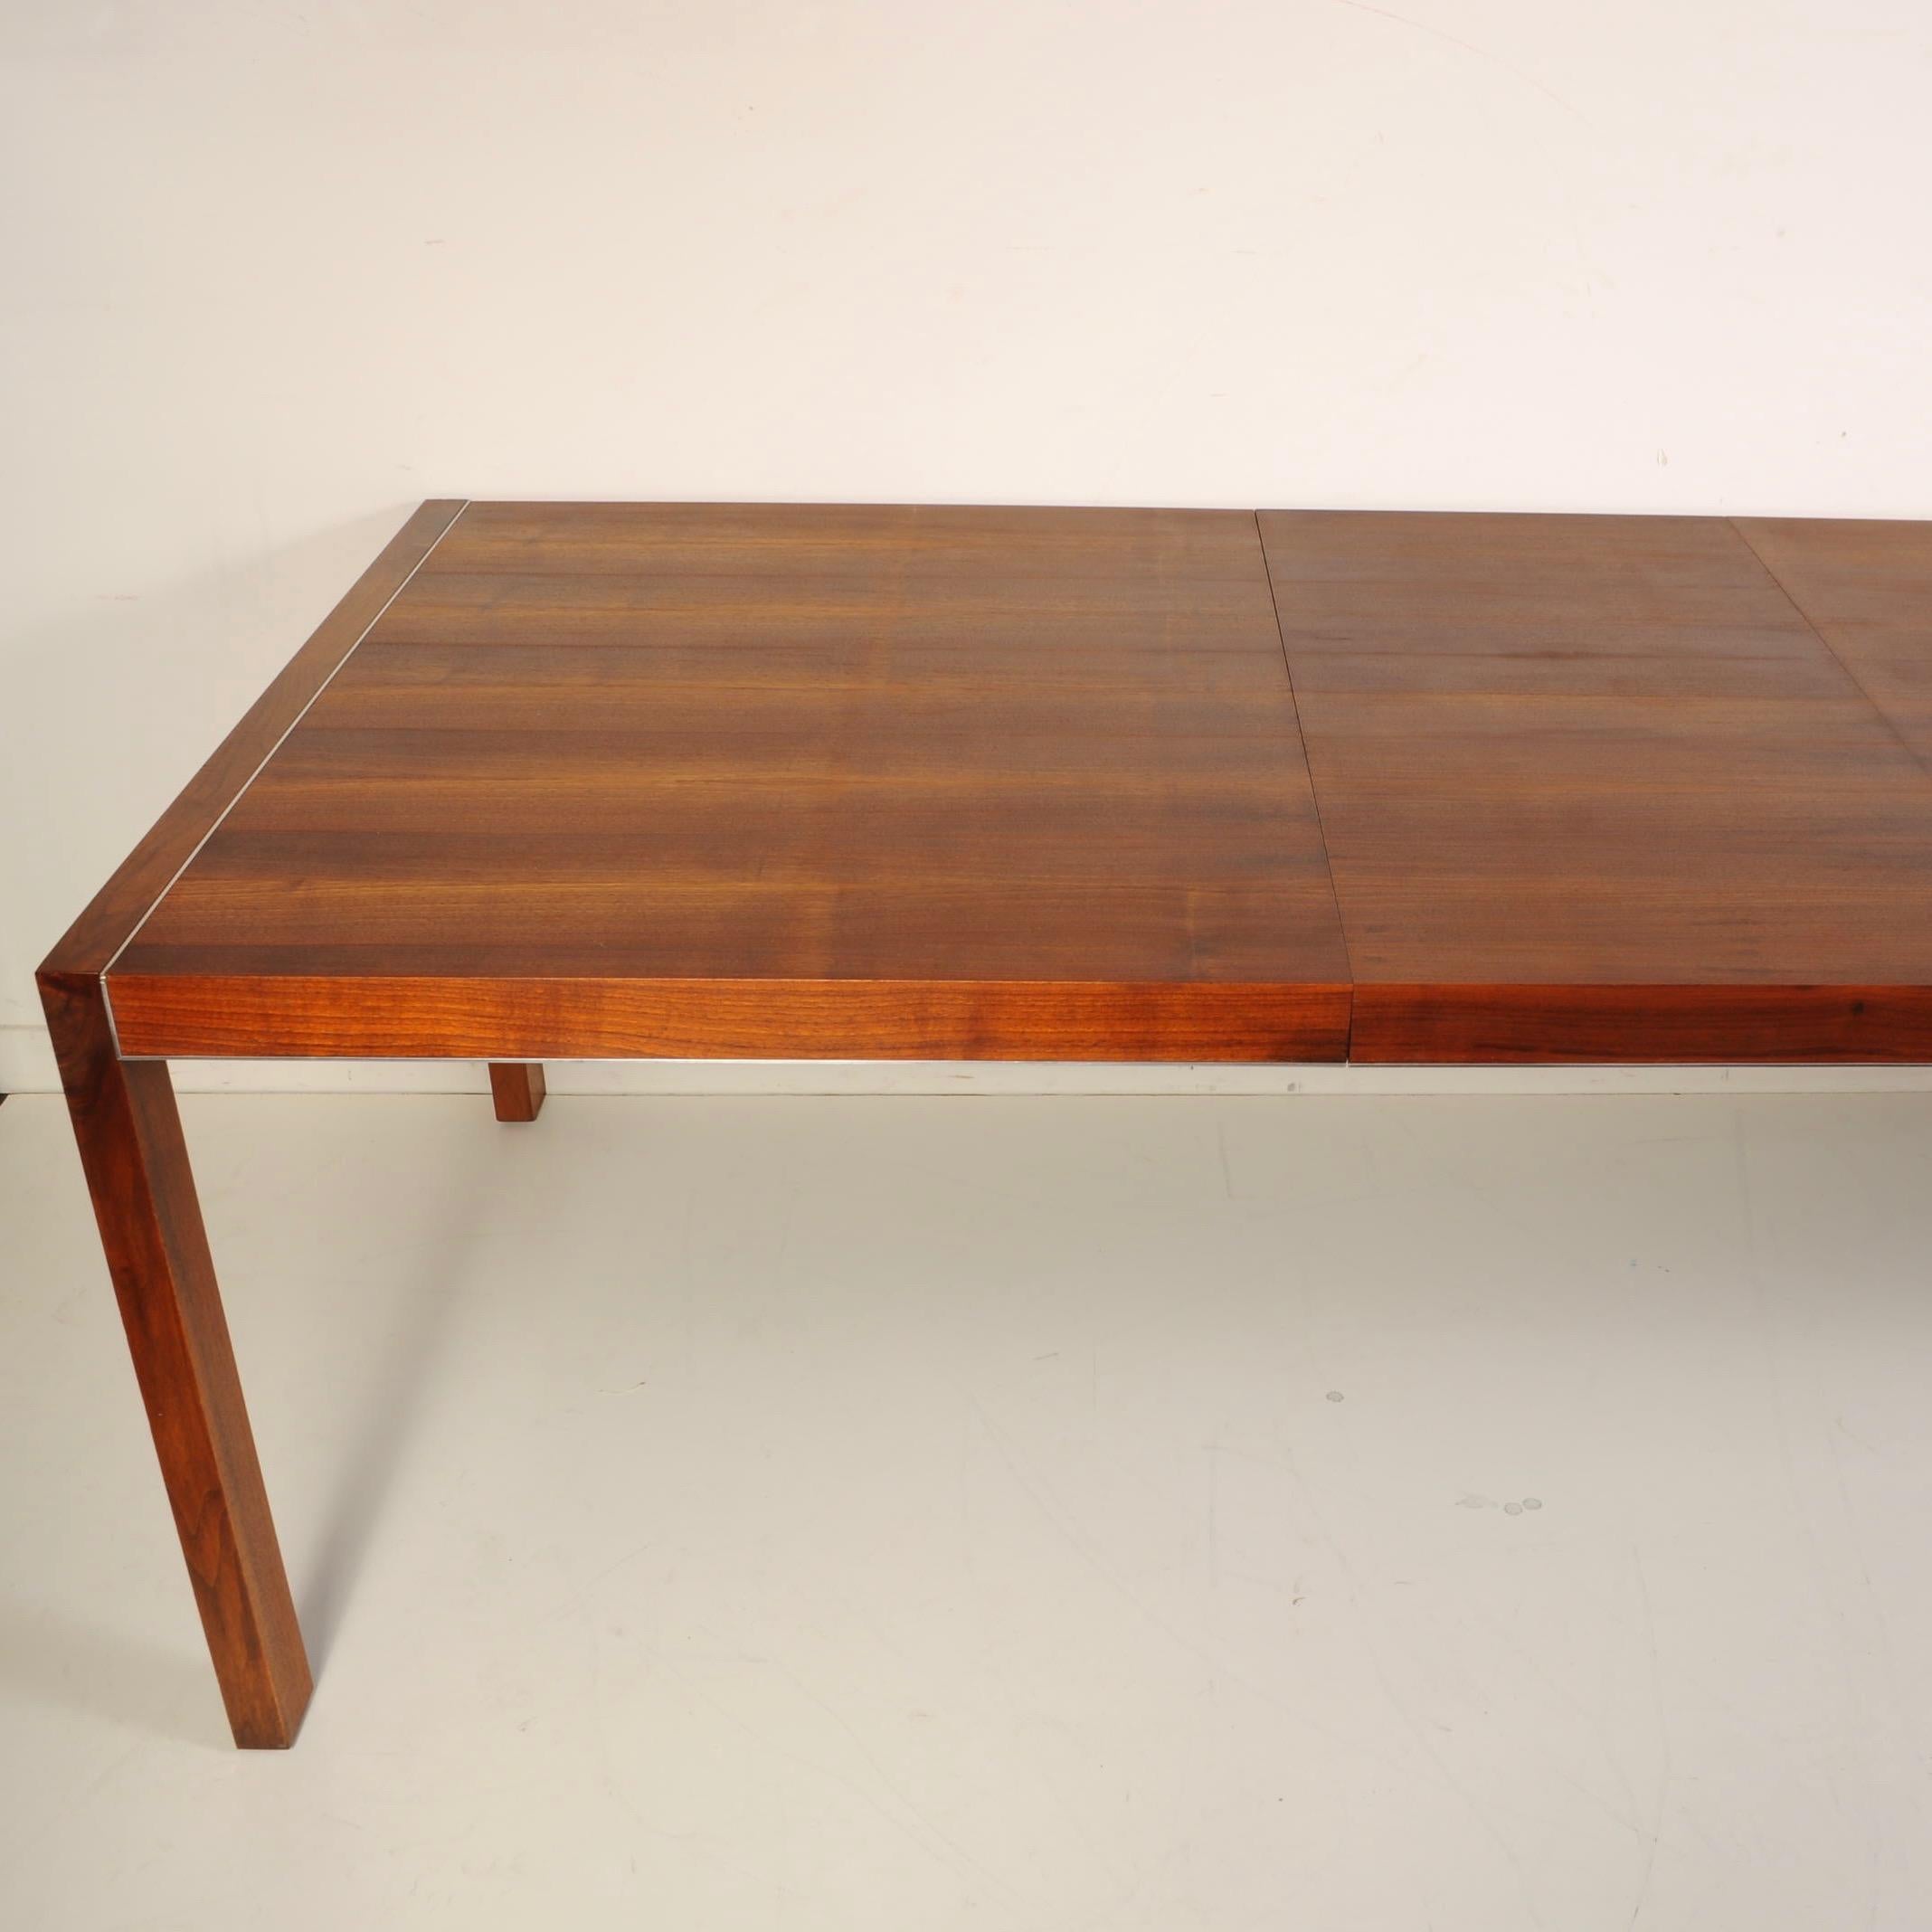 Canadian Mid-Century Modern Style Walnut and Stainless Steel Parsons Dining Table